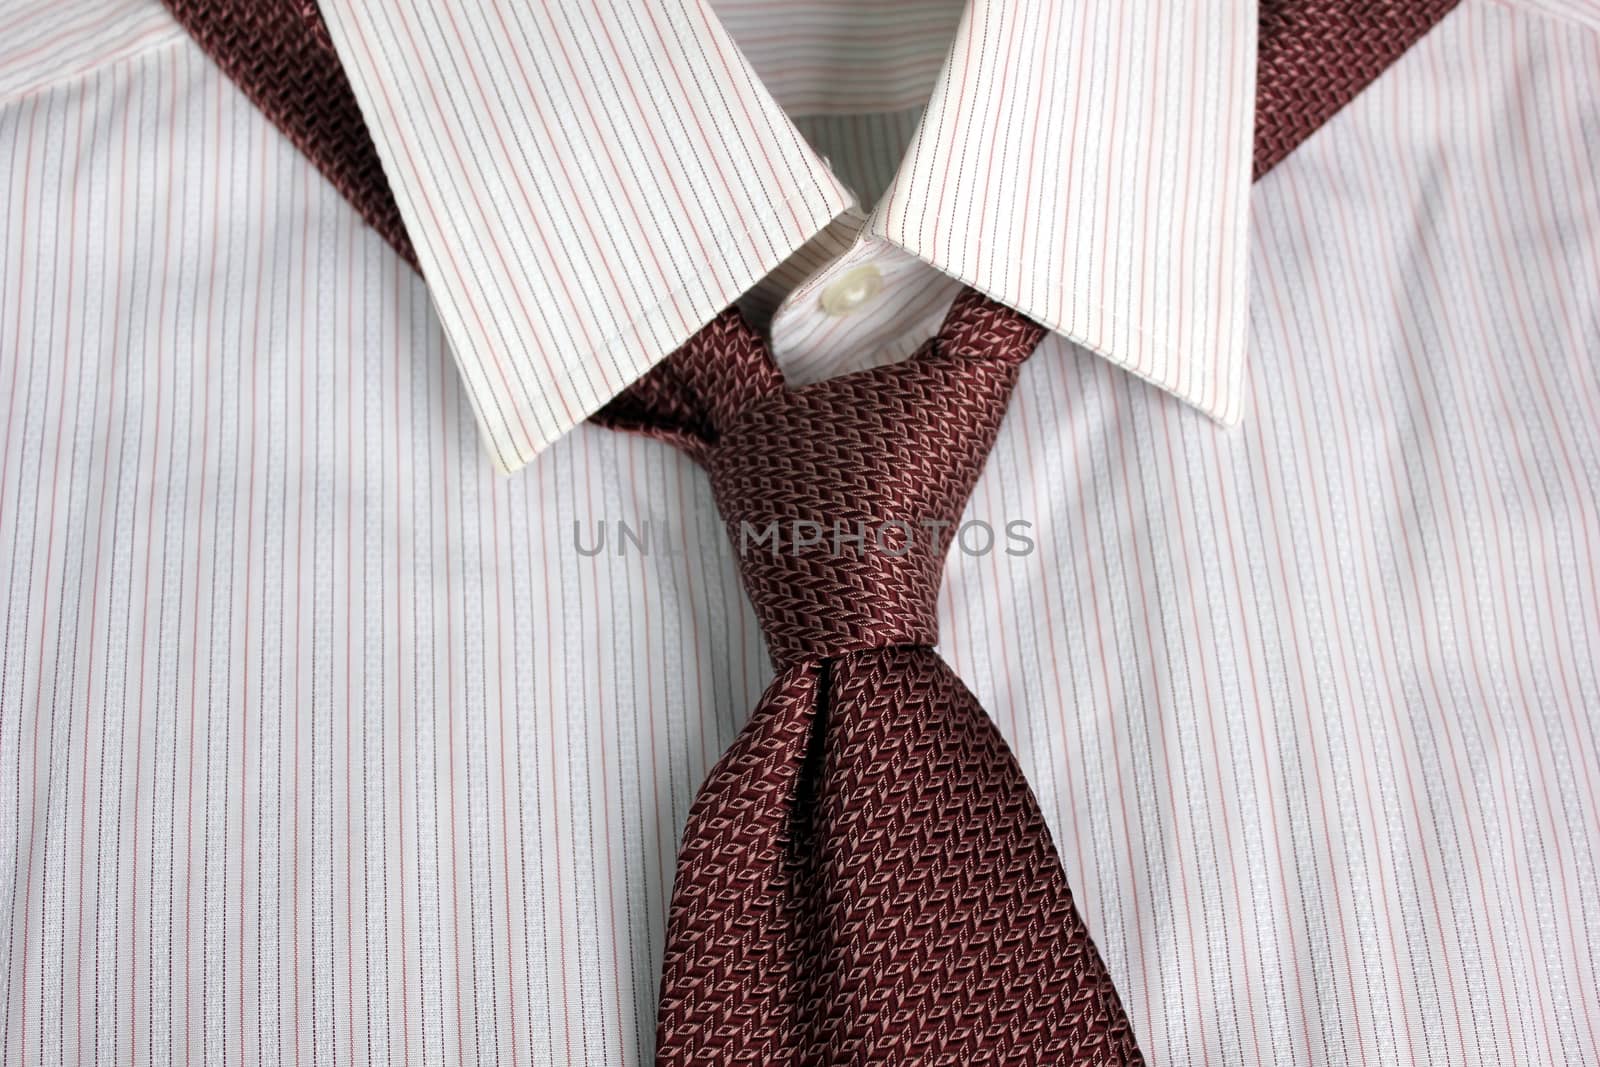 The tie tied in knot round a shirt collar